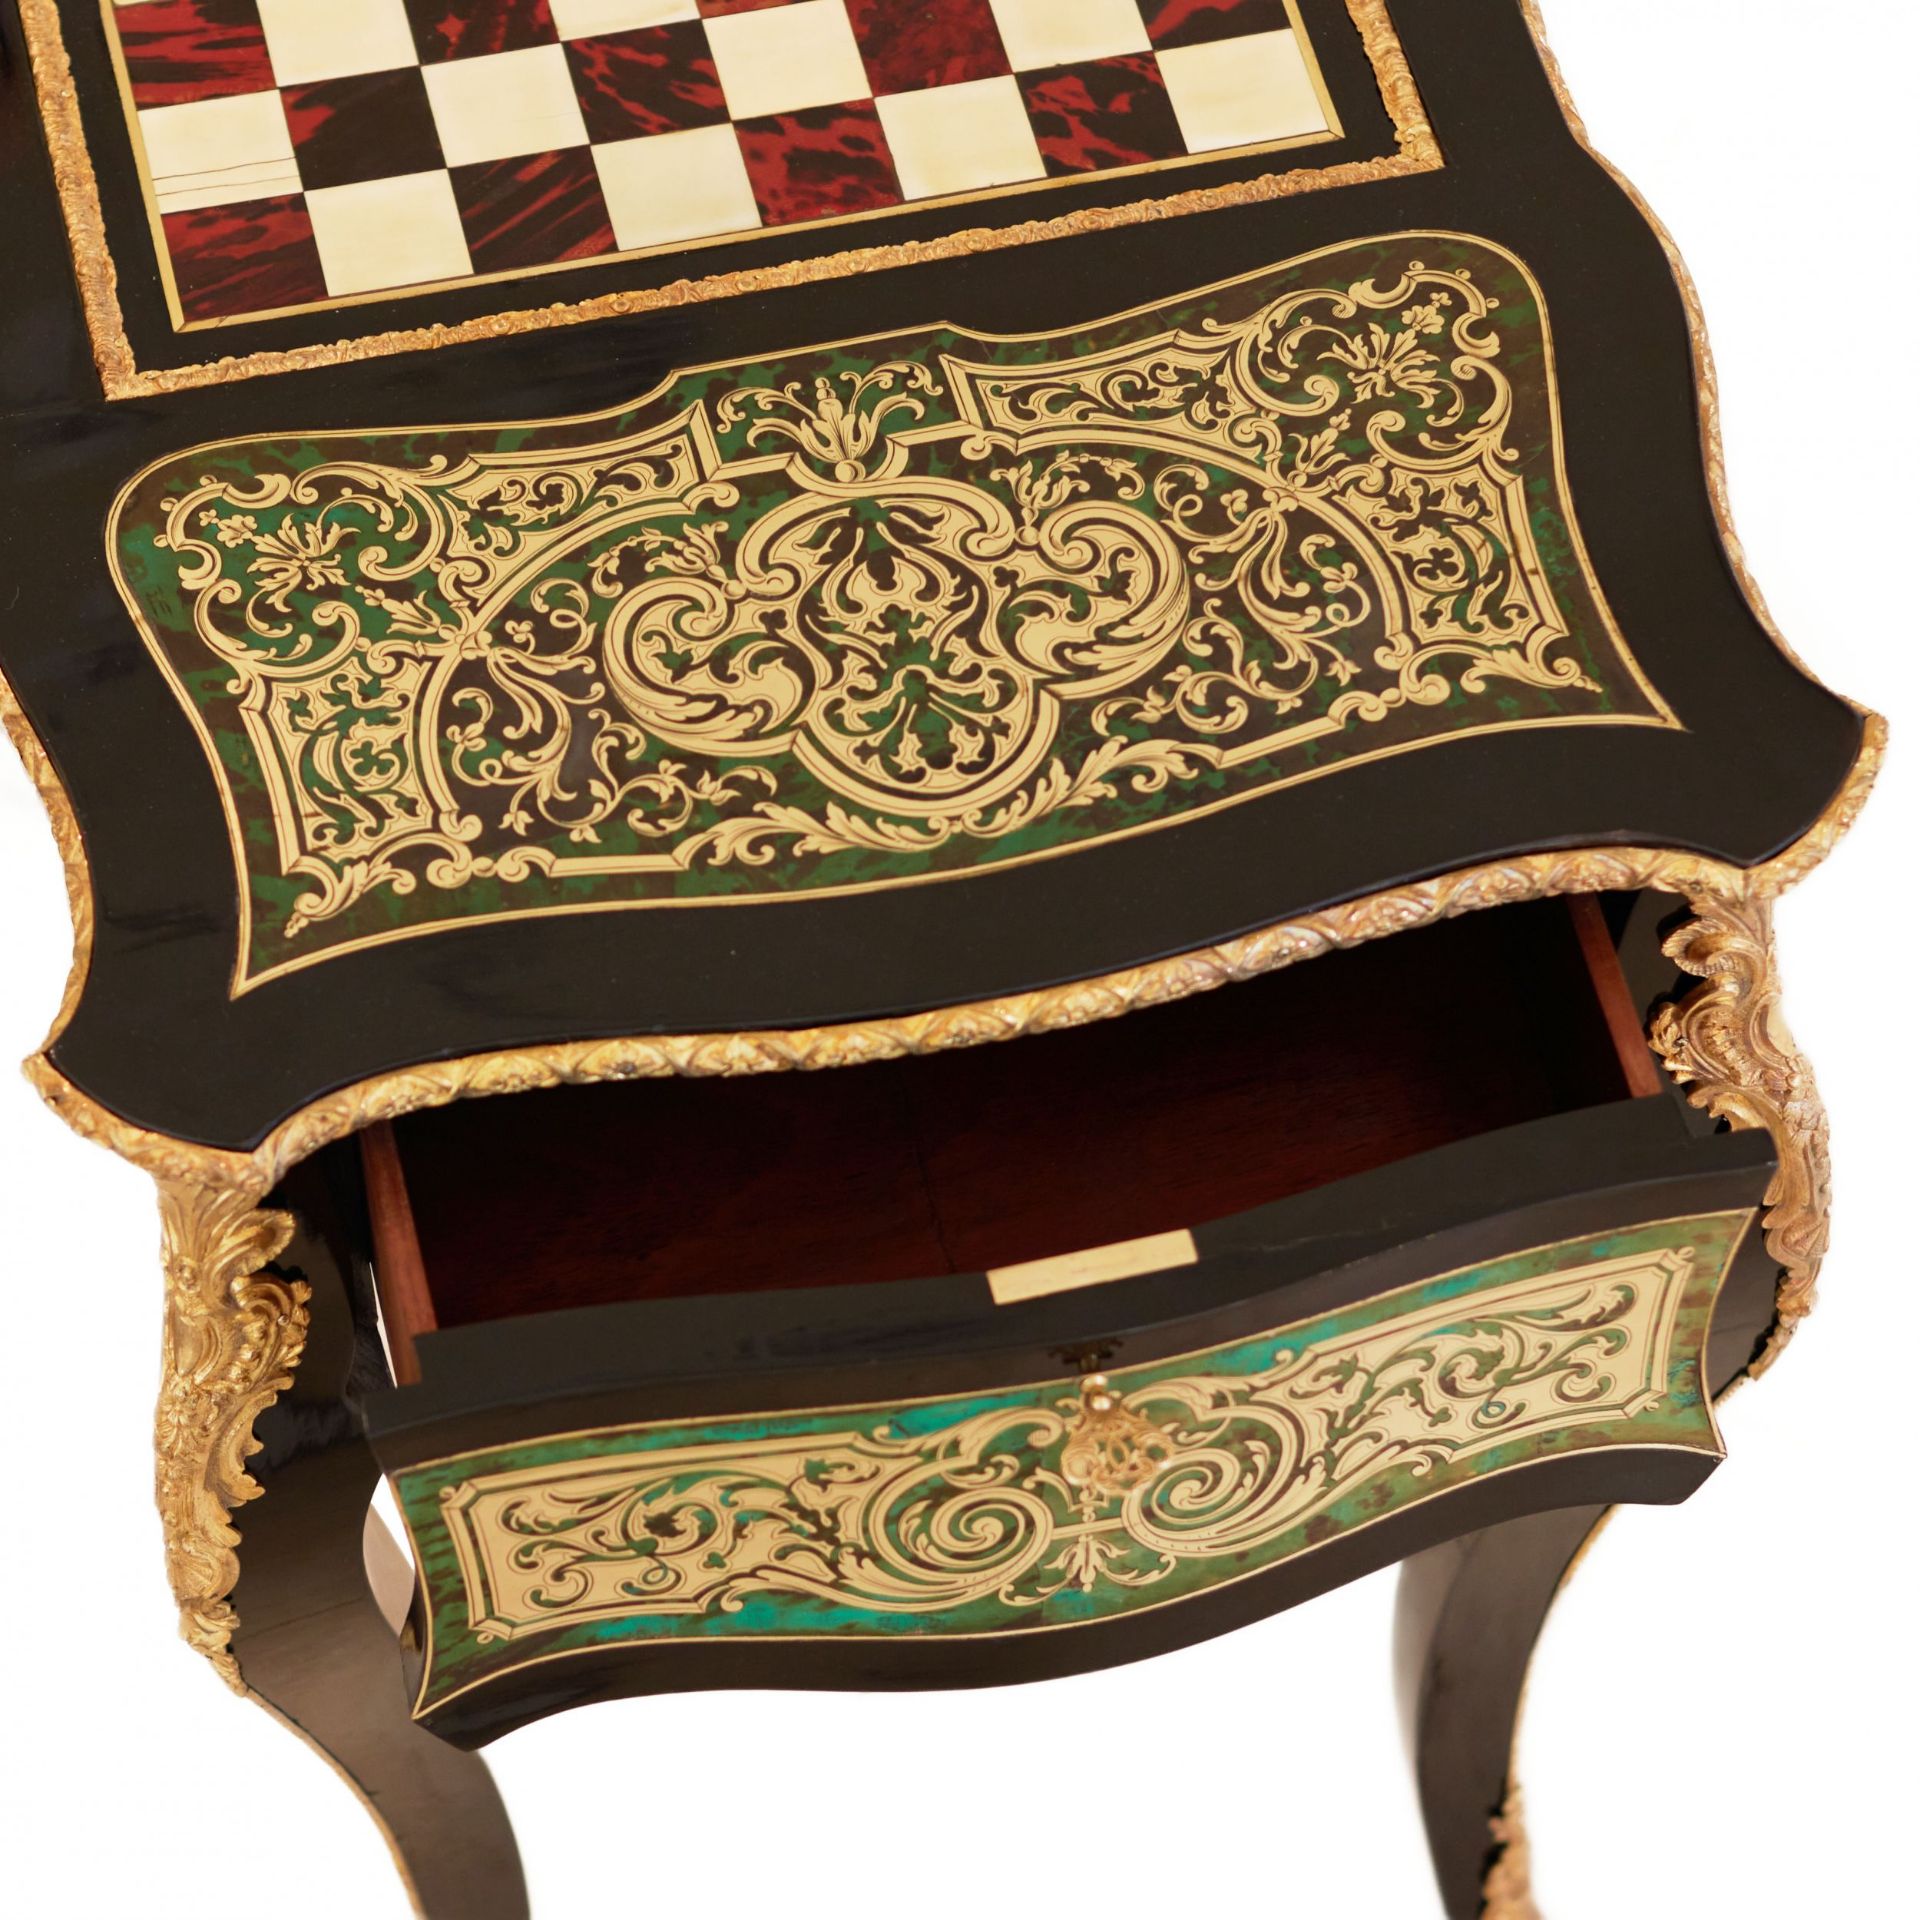 Game chess table in Boulle style. France. Turn of the 19th-20th century. - Image 9 of 11